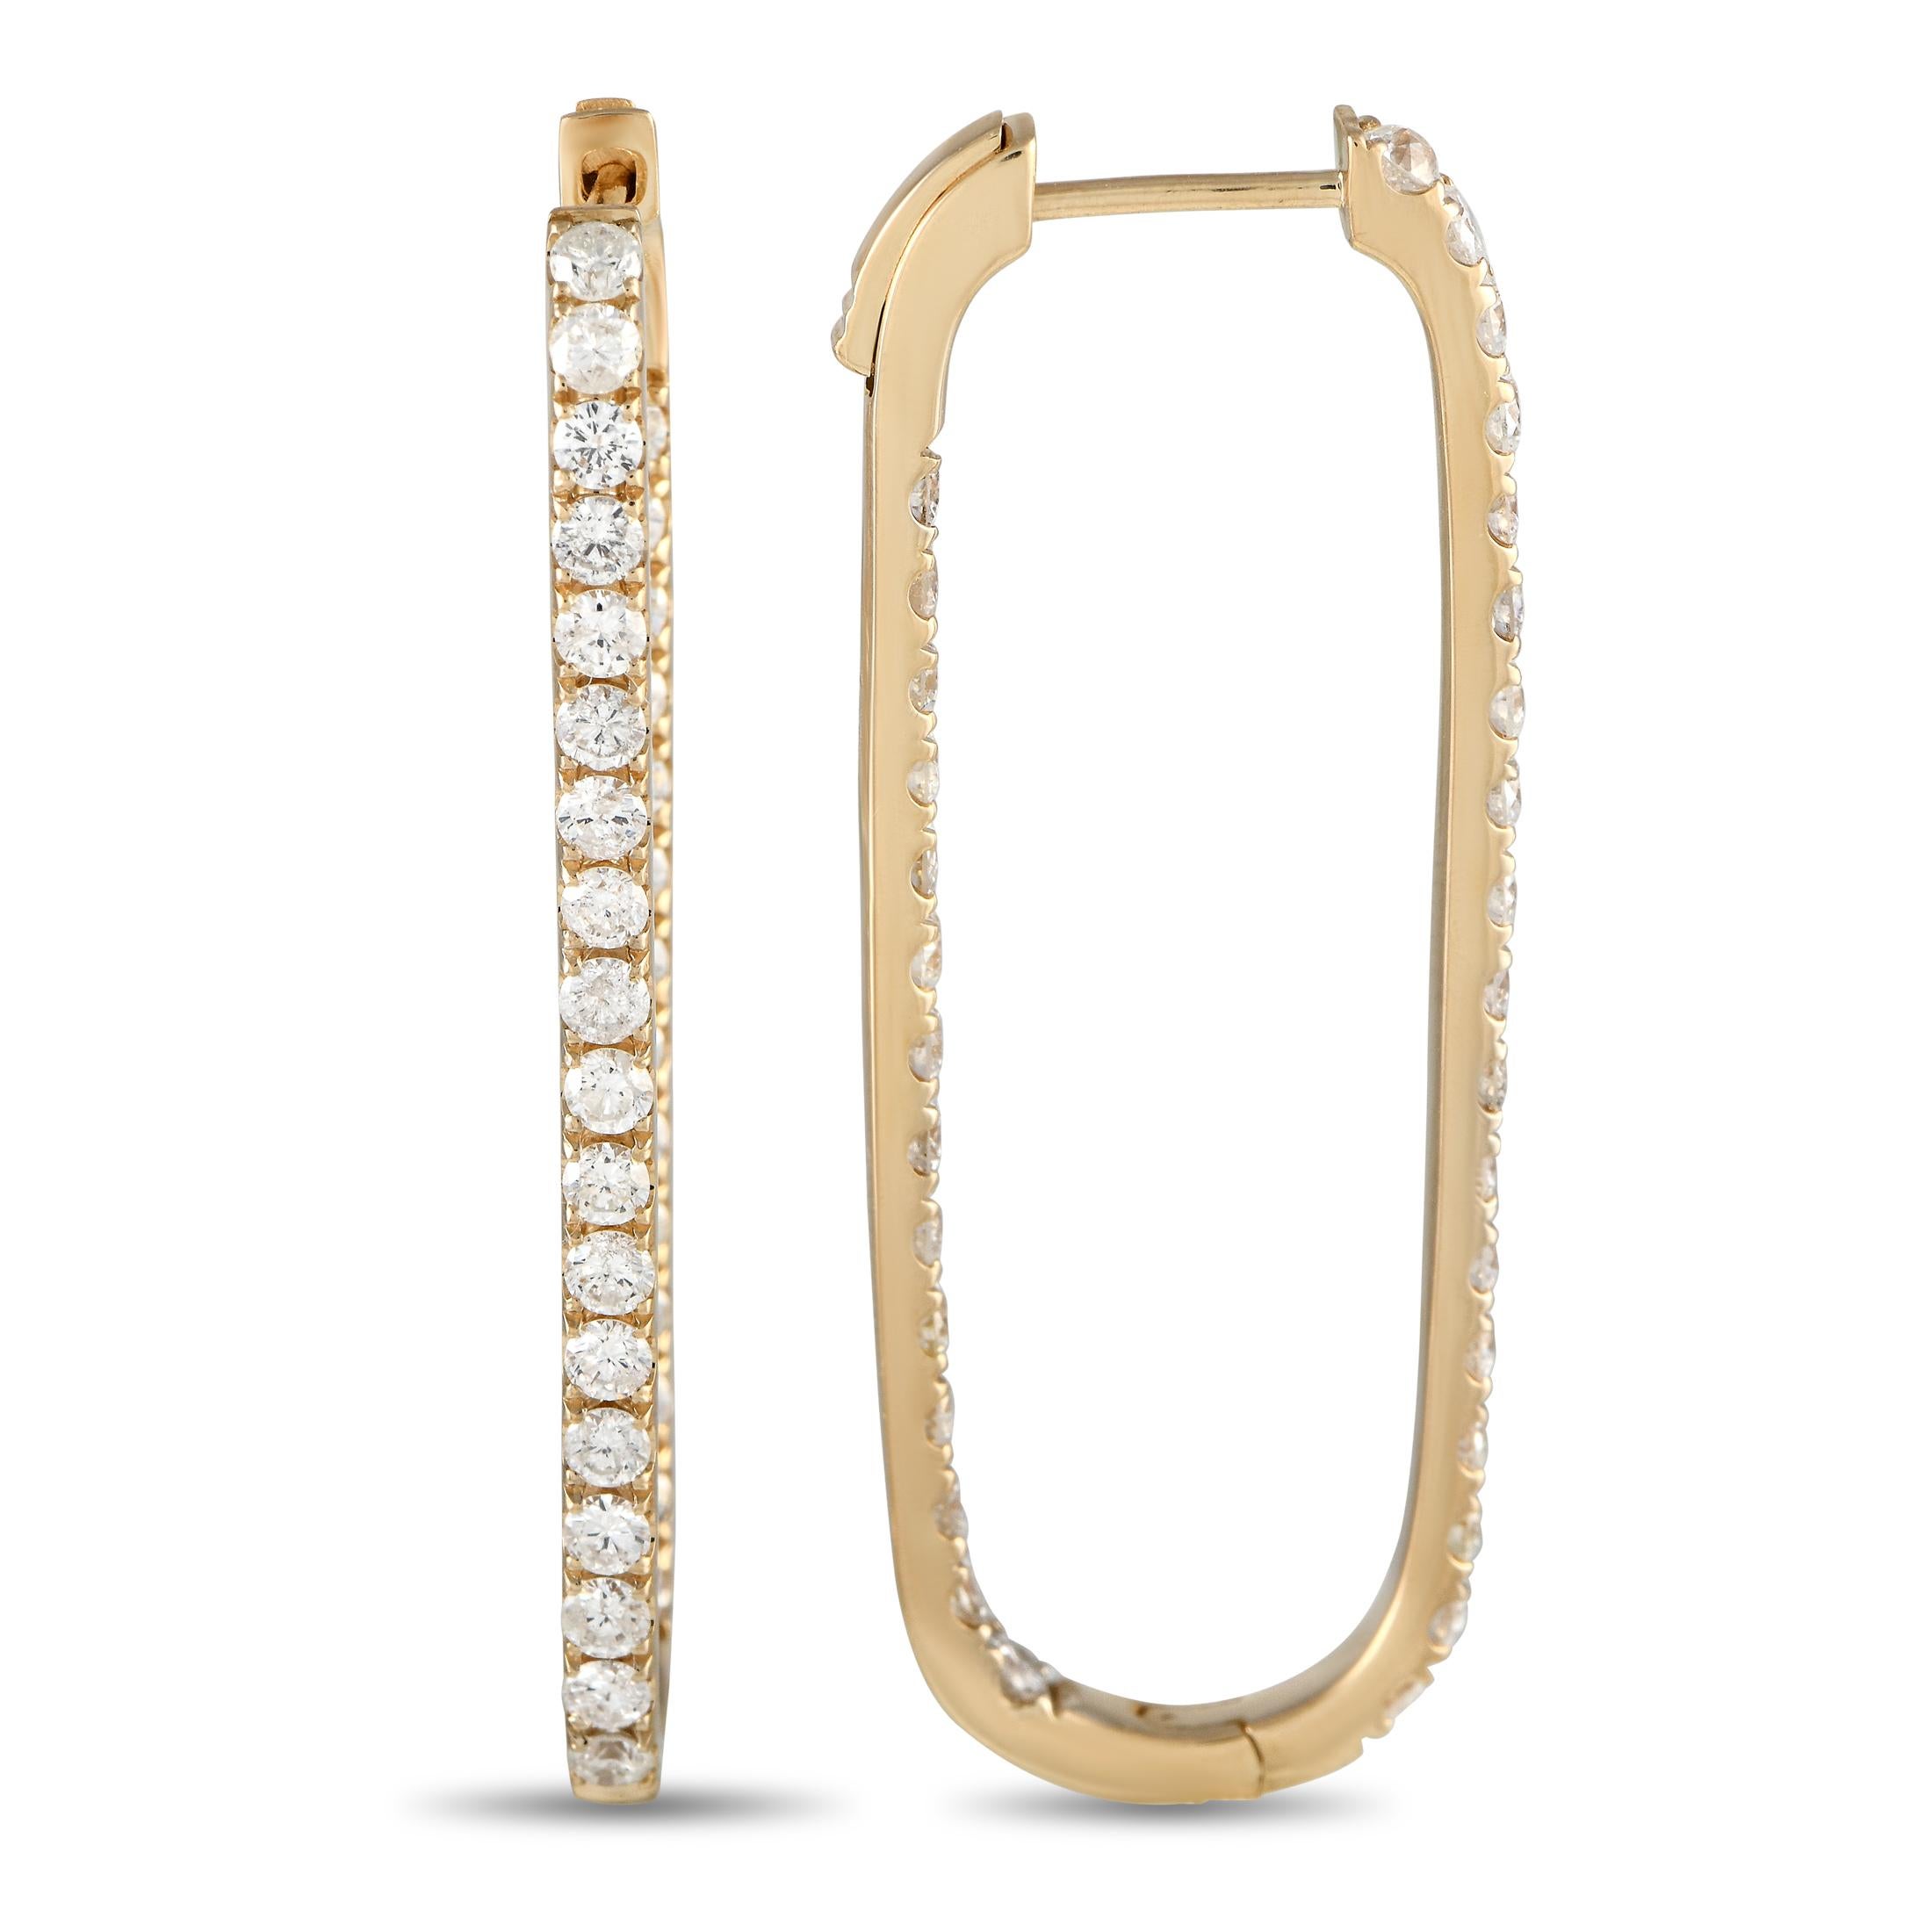 Get more creative with your diamond accessories by wearing these rounded rectangle hoops. Set in 14K yellow gold, the earrings feature a narrow row of petite round diamonds mounted on the front edge and front-facing back edge of each hoop. They're